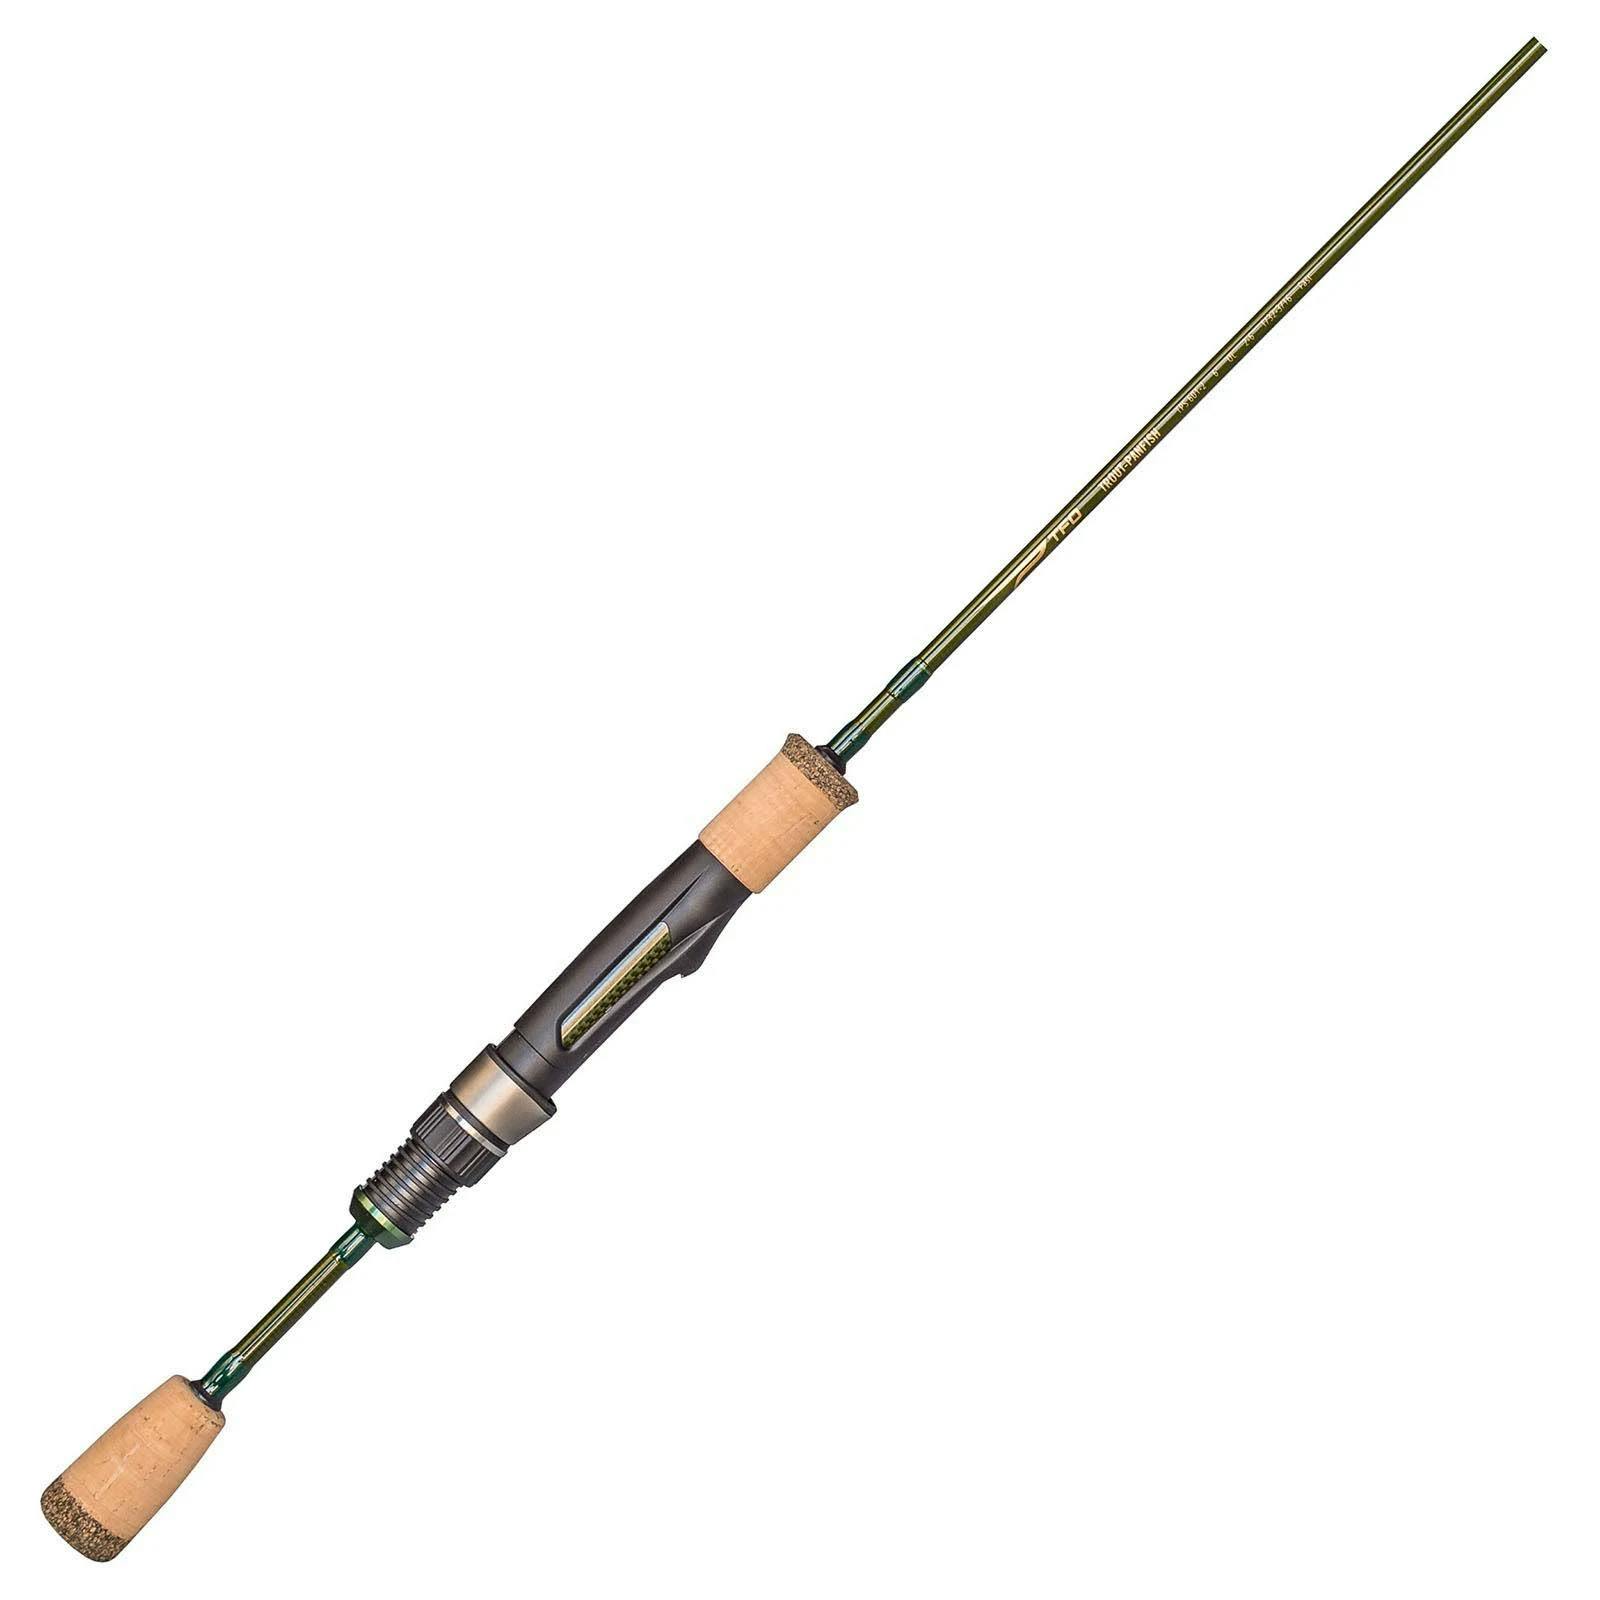 5 Best Trolling Rods For Trout: Our Top Picks • Fishing Duo